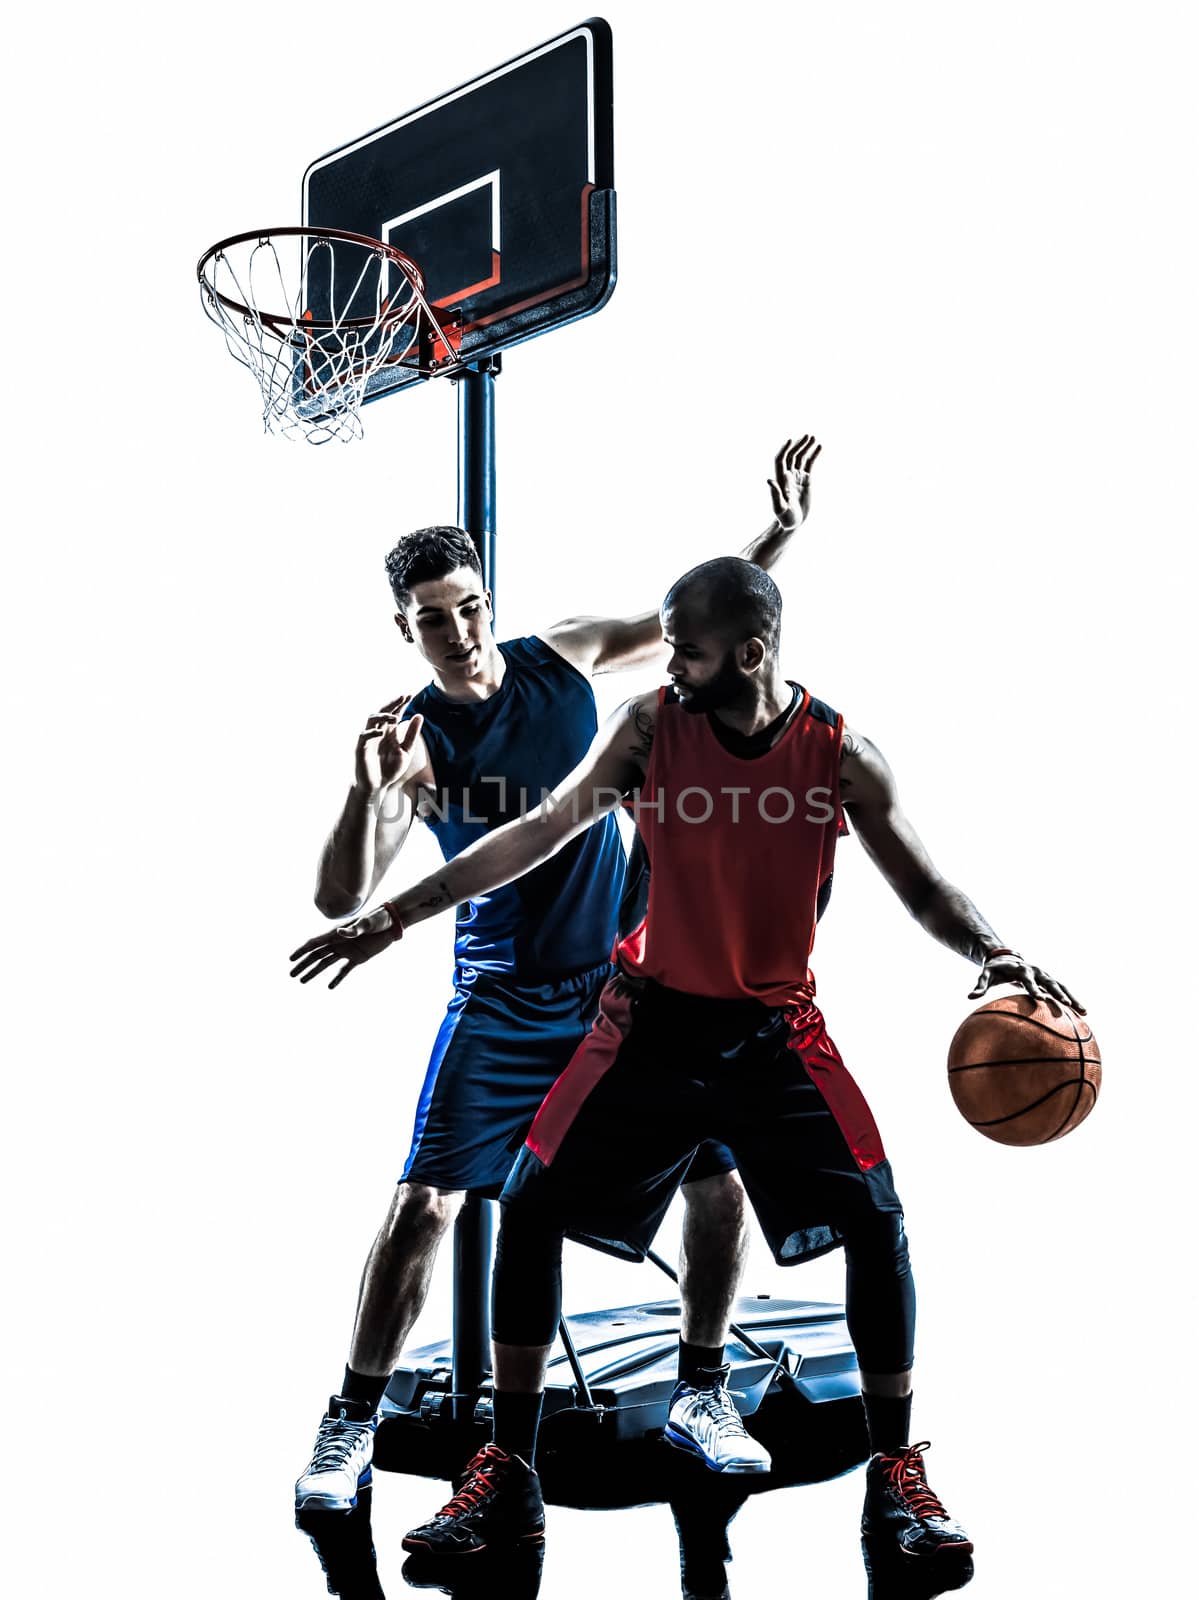 two men basketball players competition dribbling in silhouette isolated white background